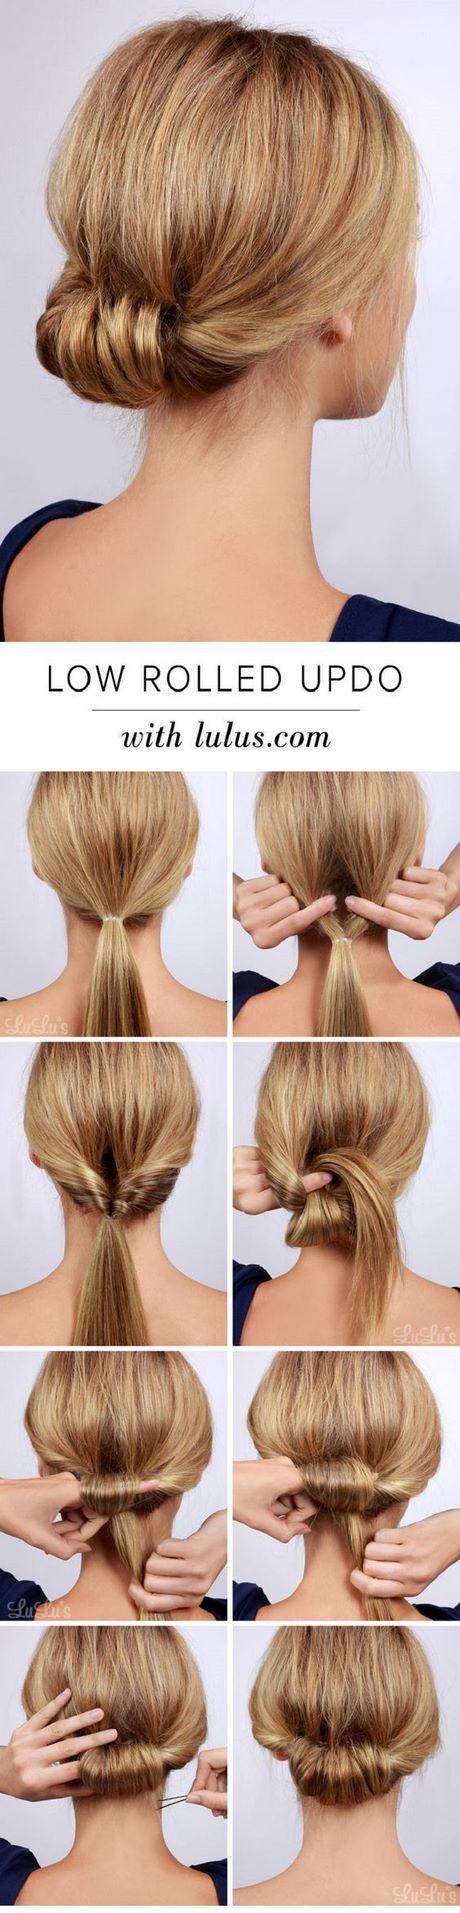 Easy professional updos for long hair easy-professional-updos-for-long-hair-02_15